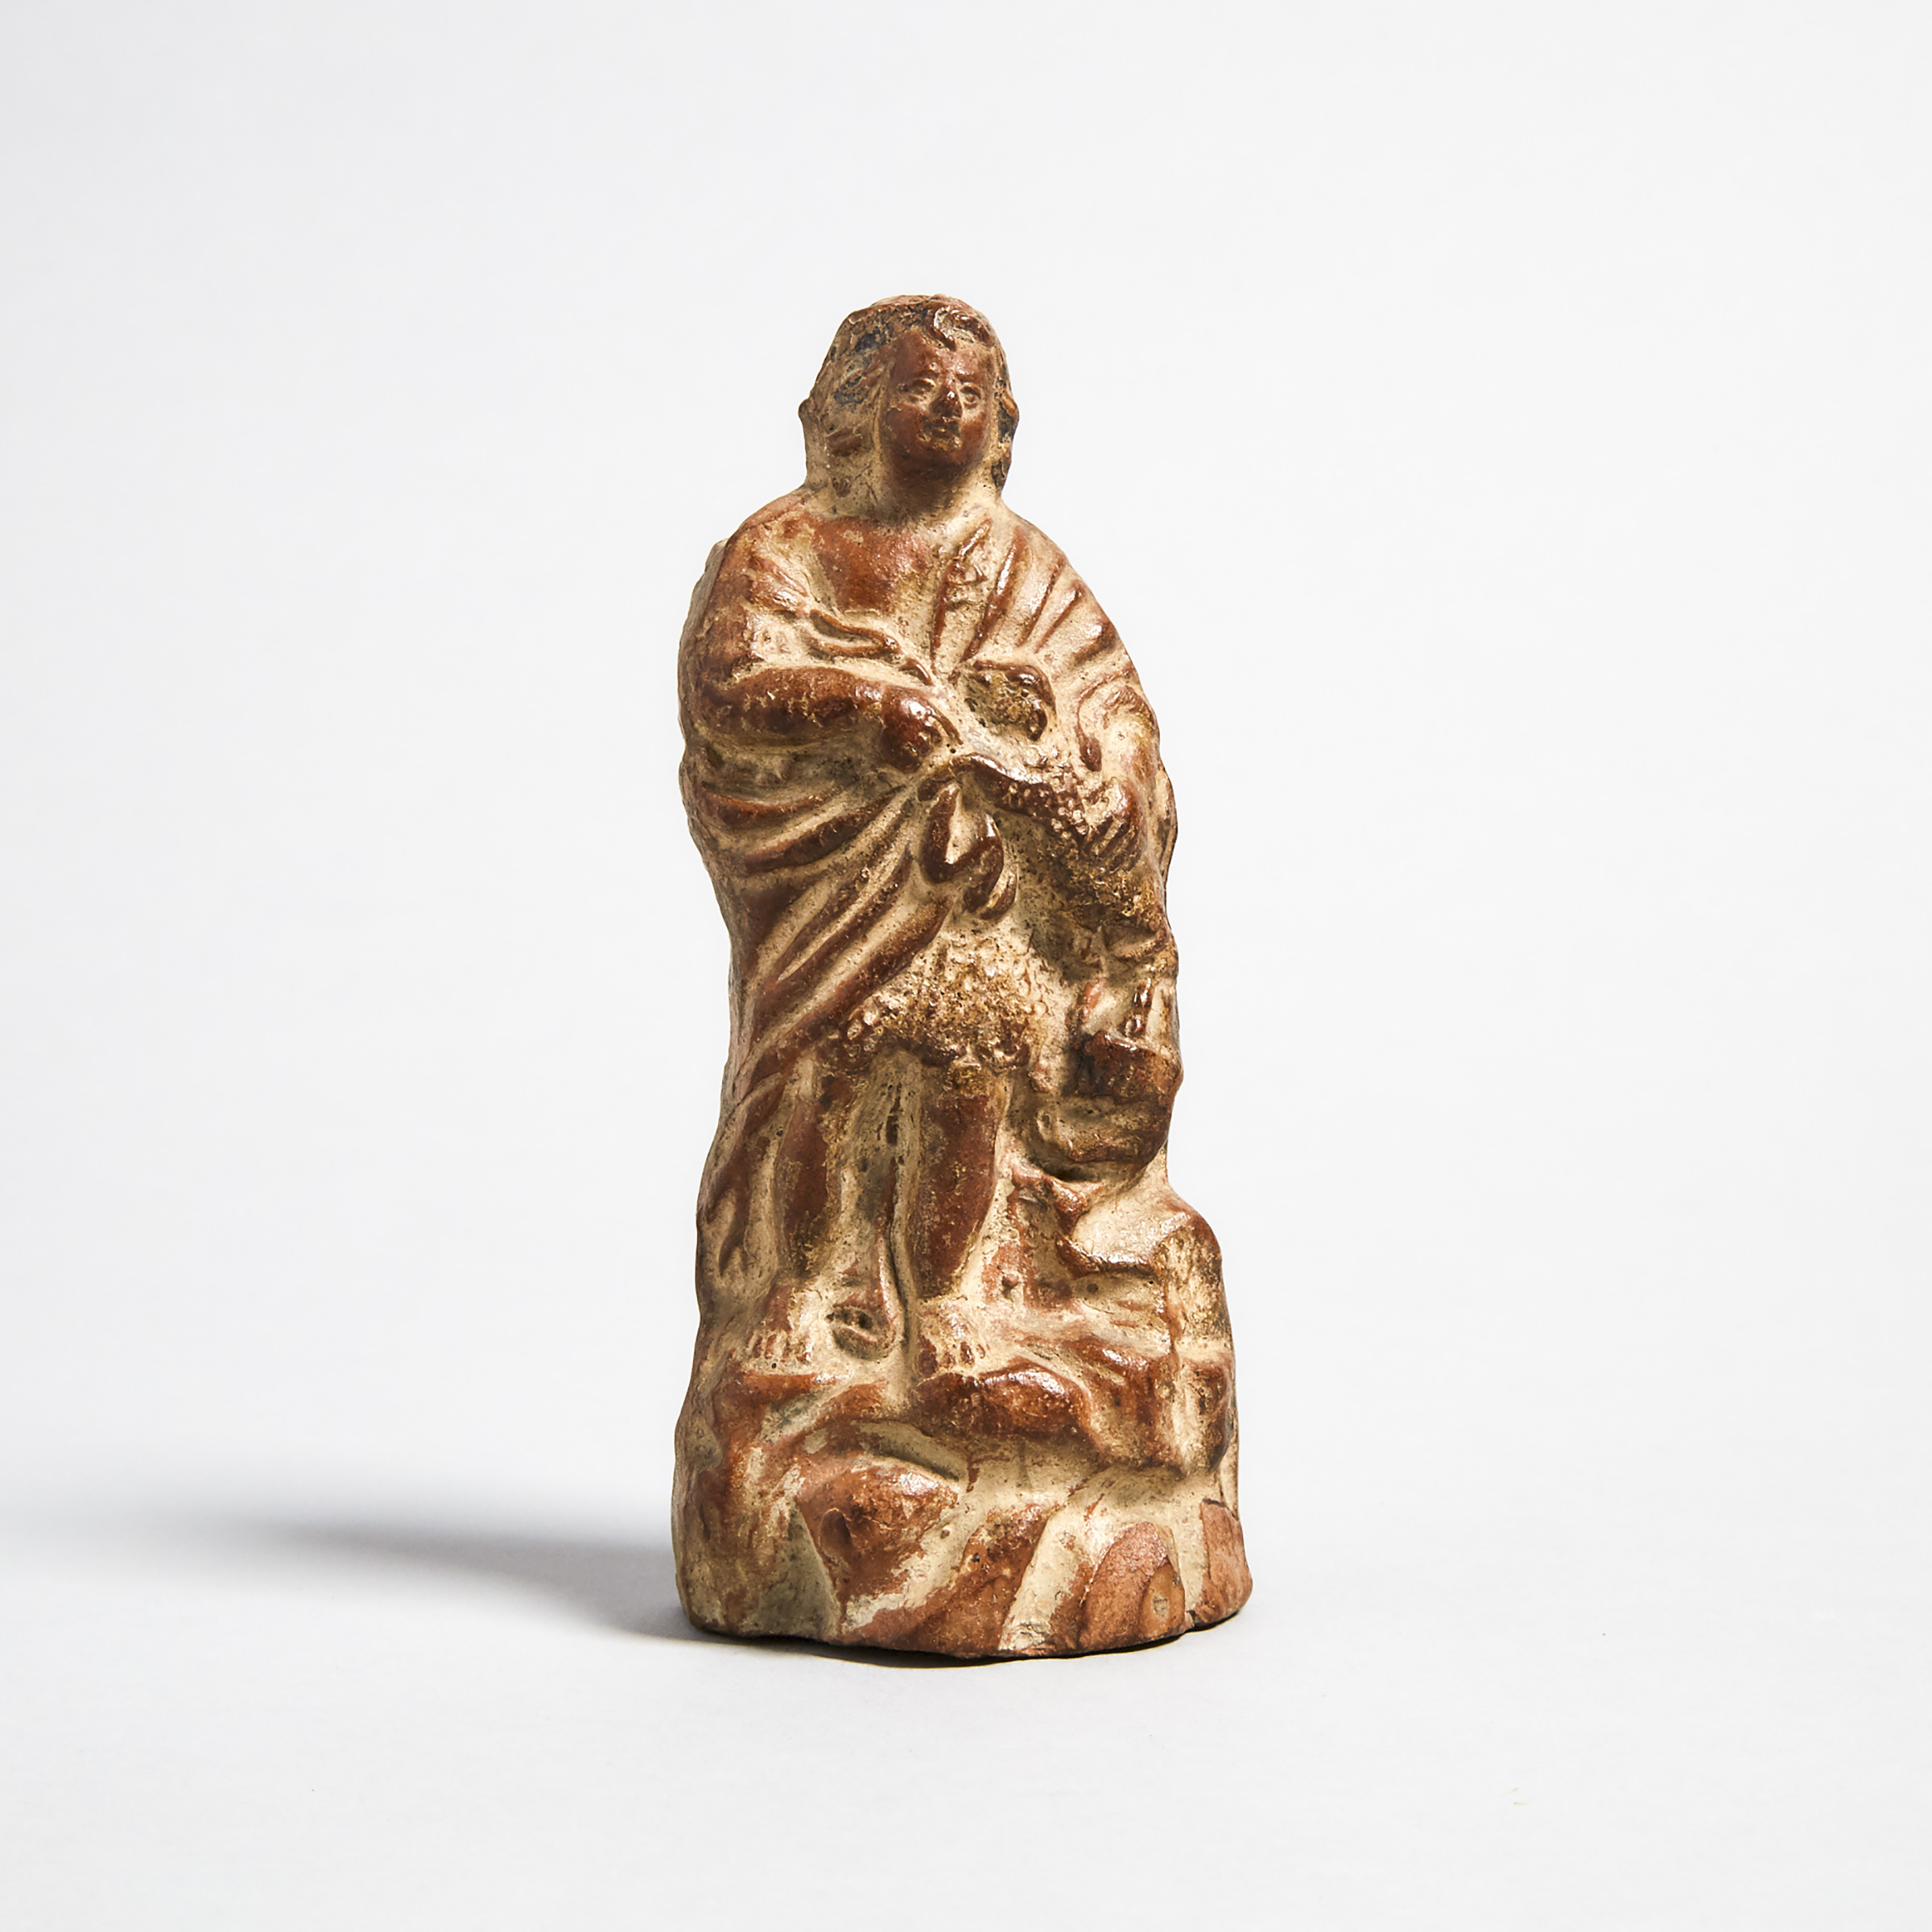 Continental Terra Cotta Nativity Figure of a Shepherd with Lamb, 18th century or earlier